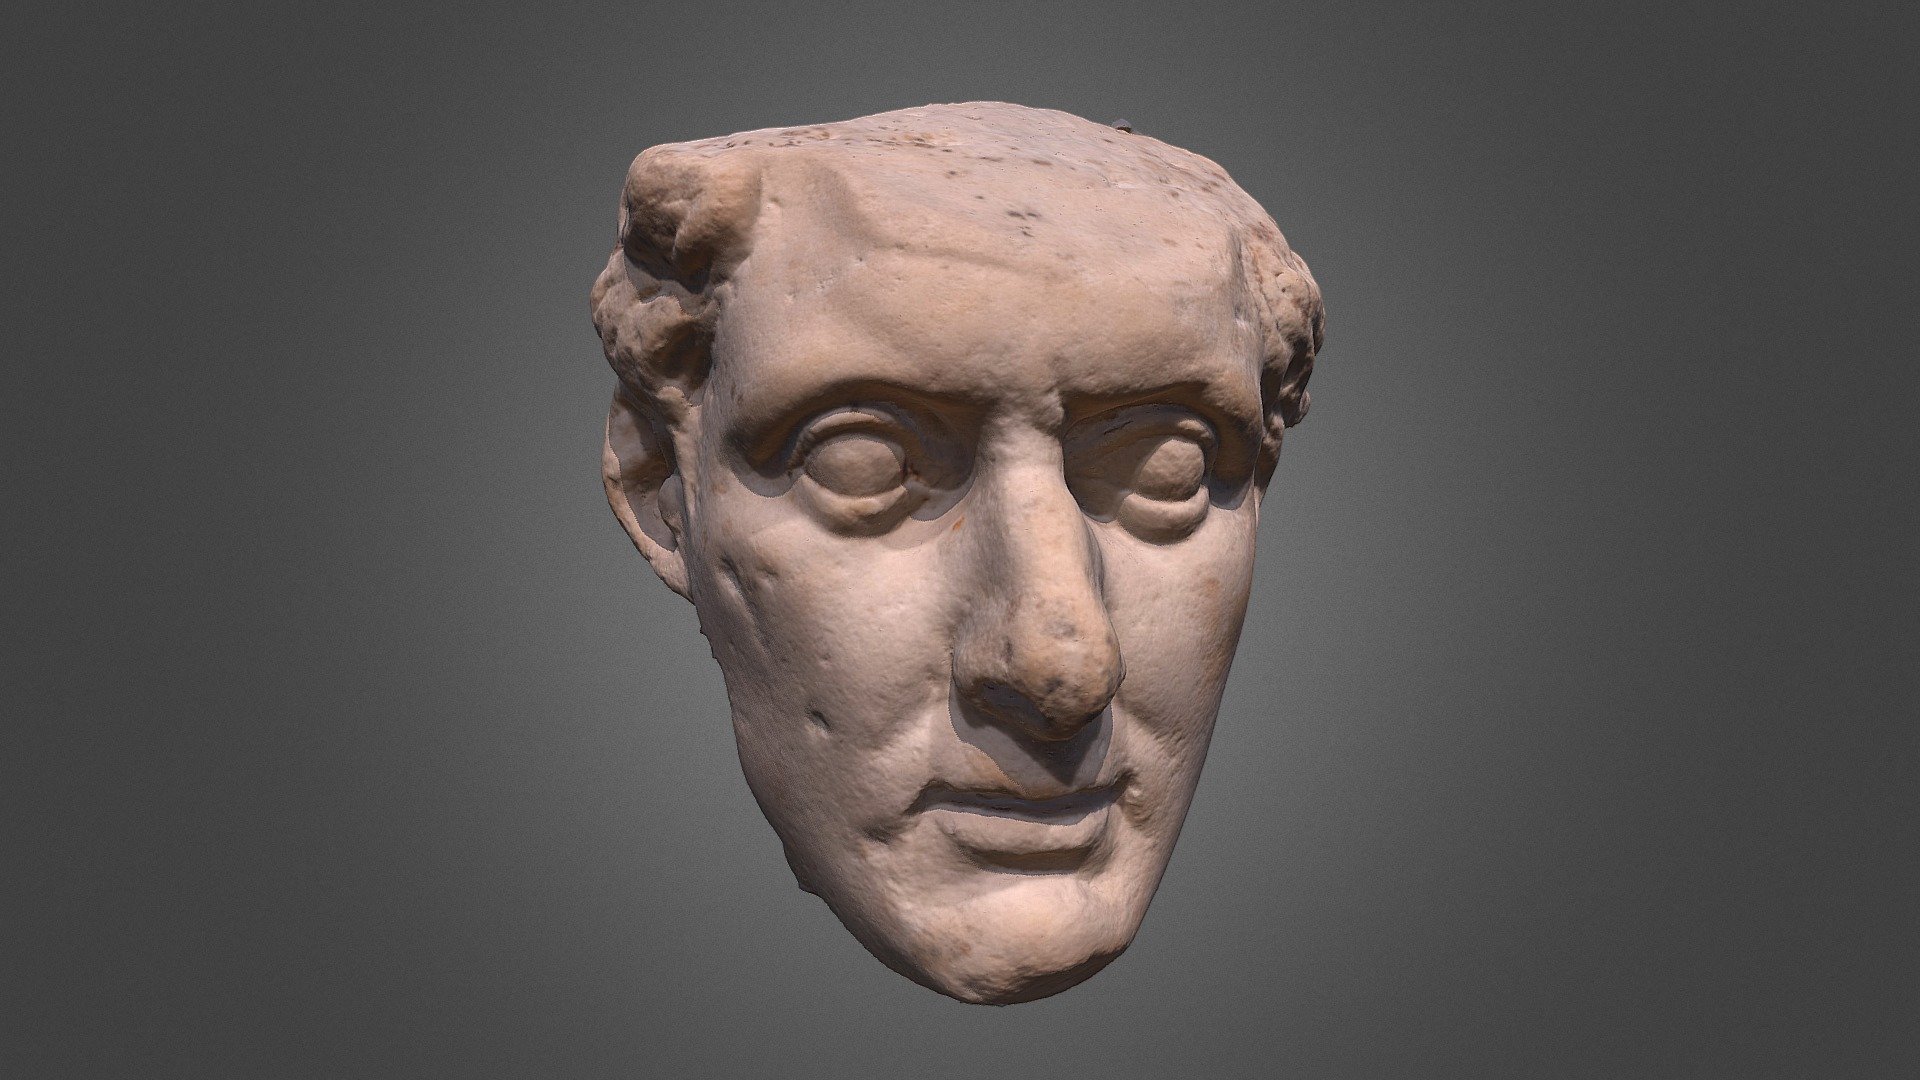 Head of Ptolemy | Soter (Savior)

Ptolemaic, 300-250 BC, Marble

Created in RealityCapture by Capturing Reality from 71 images in 00h:04m:49s 3d model